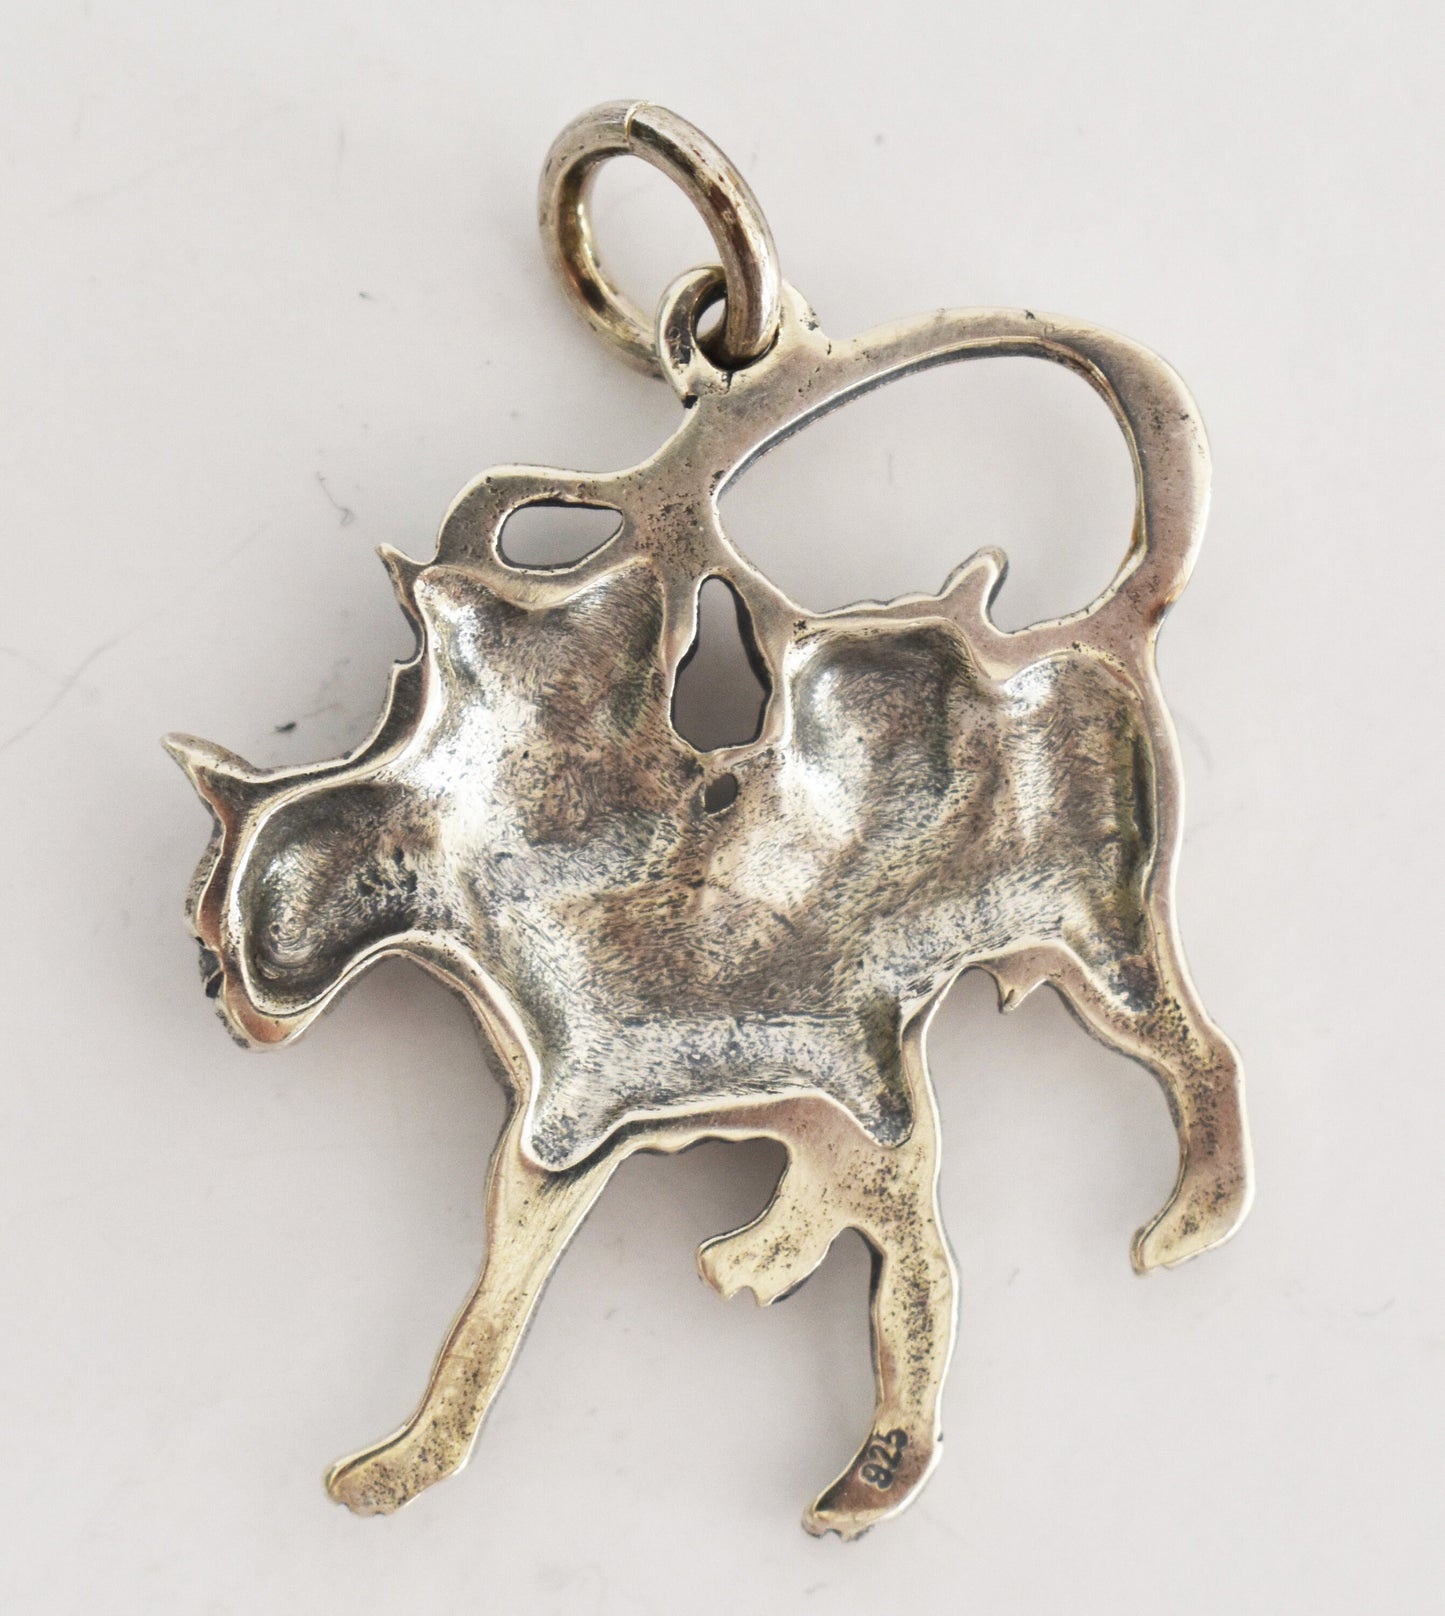 Cerberus -Three-Headed Dog of Hades - Guardian of the Underworld - Pendant - 925 Sterling Silver